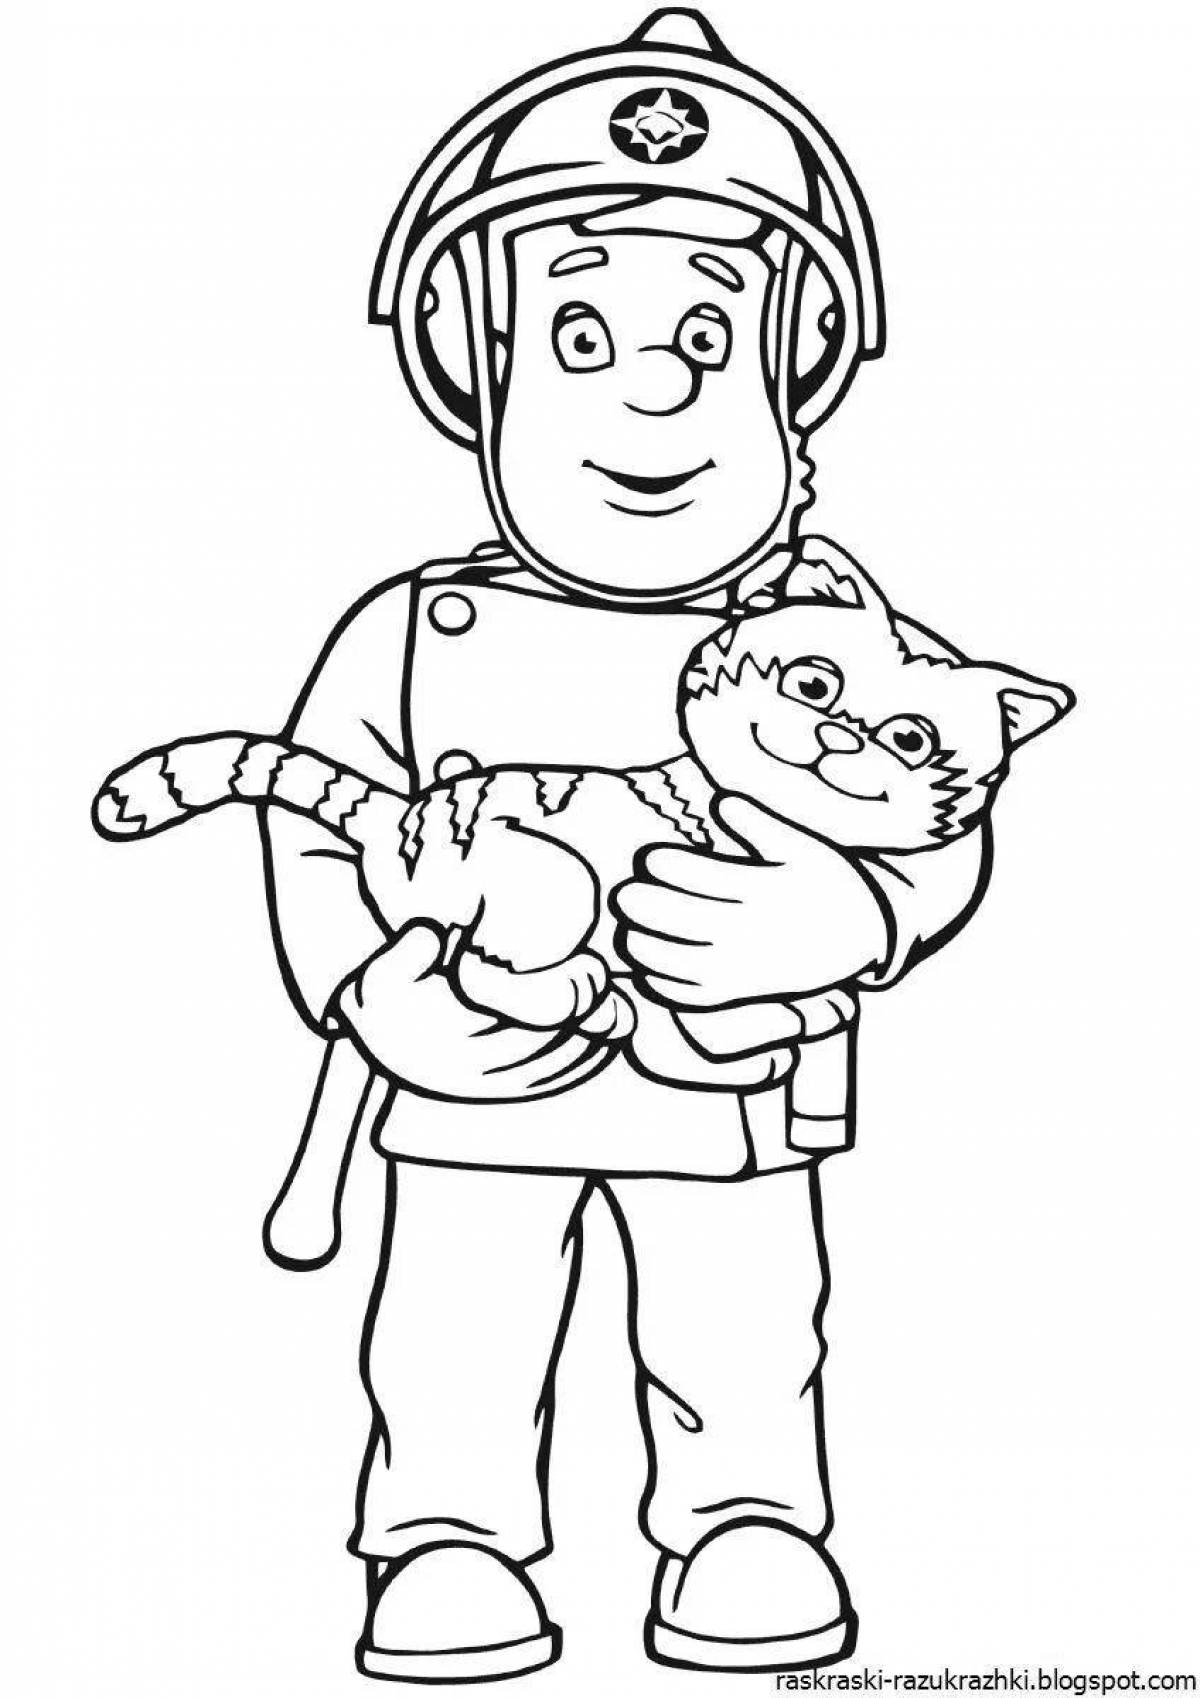 Outstanding fireman coloring pages for kids